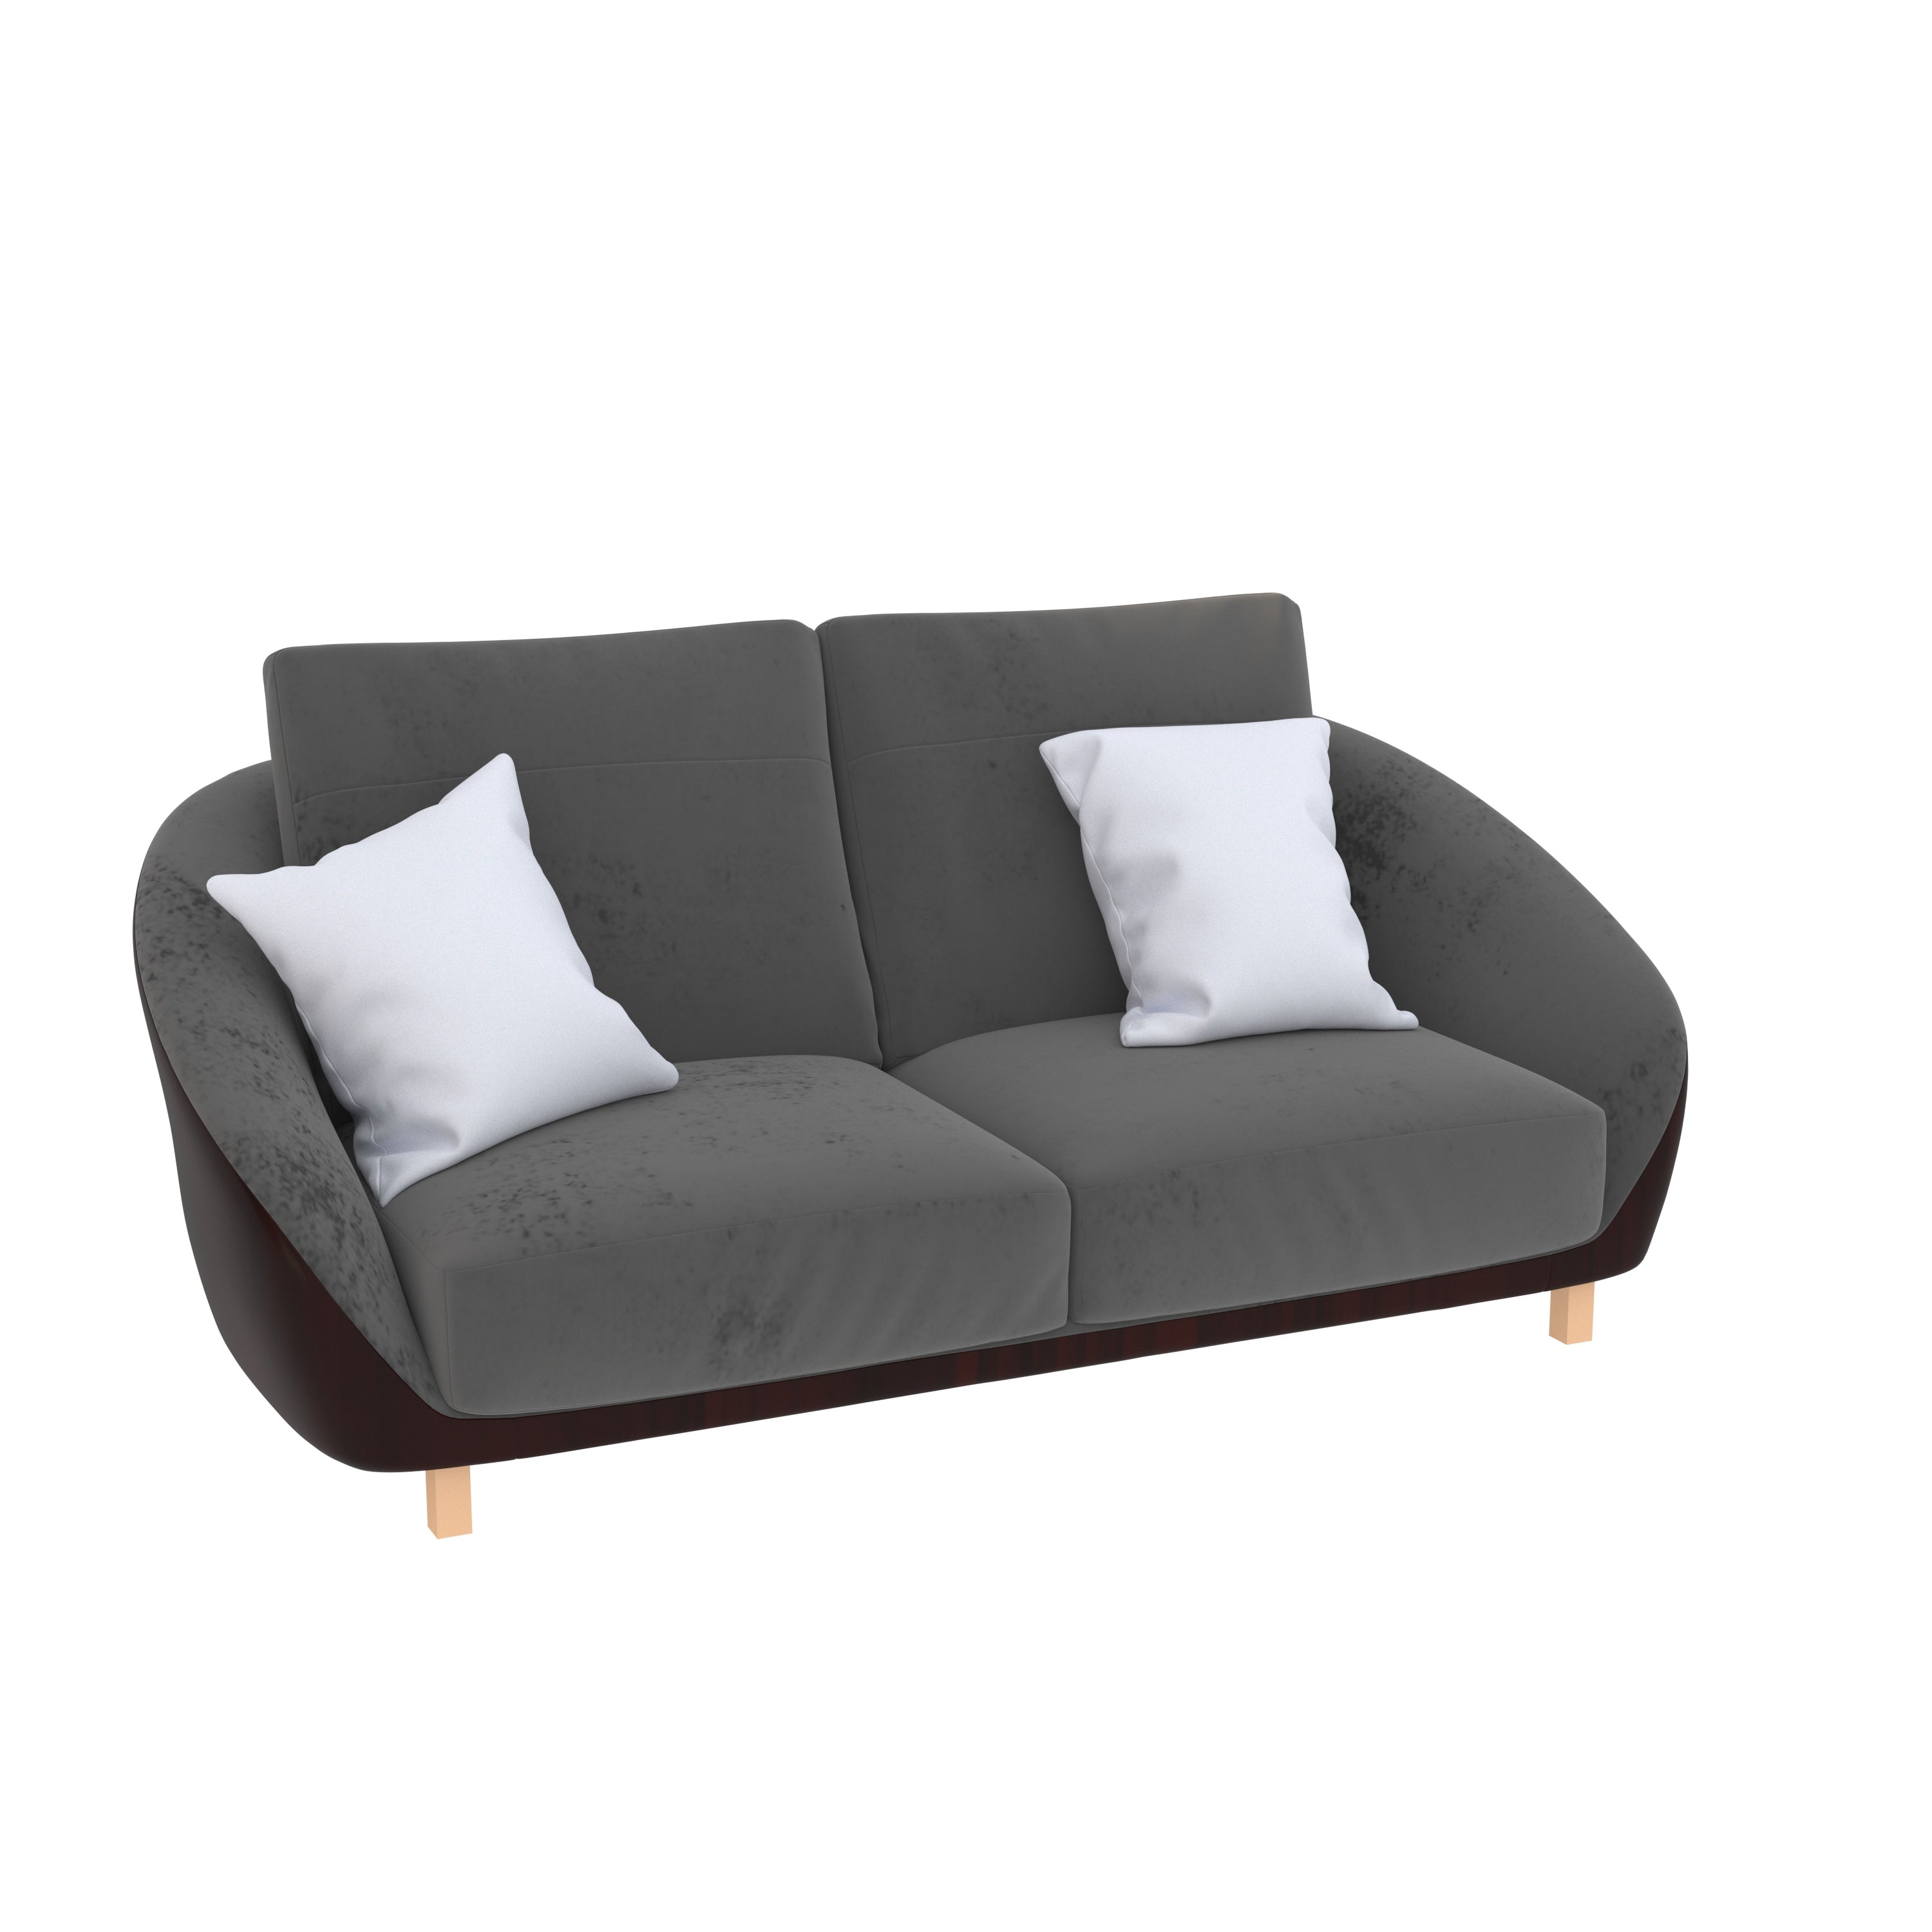 Strong Iron Gray Smooth Finish Wooden 2 Seater Sofa Sofa